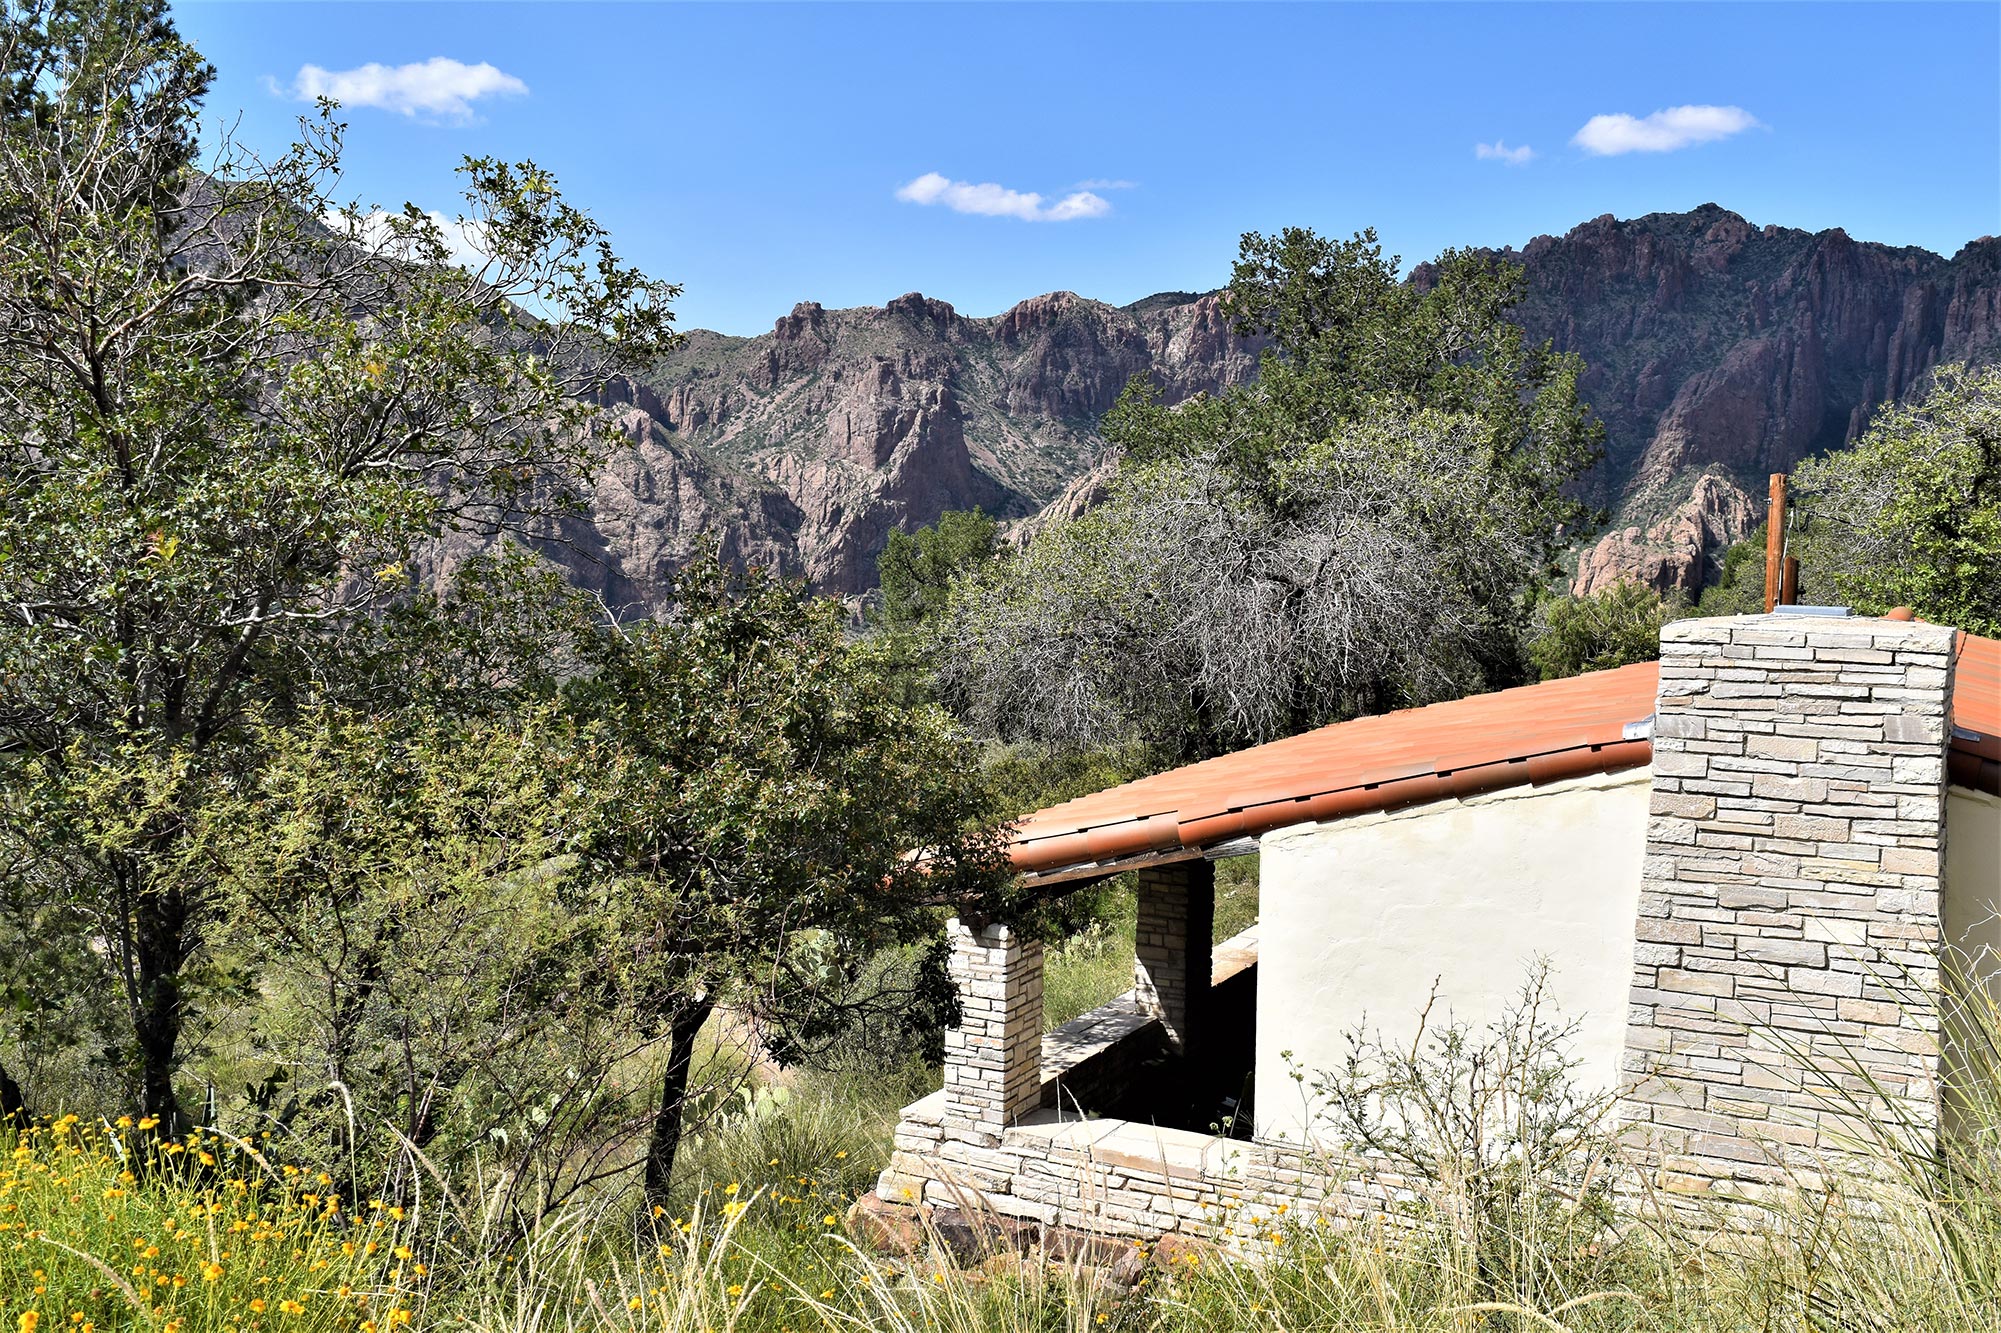 Roosevelt Stone Cottage with a backdrop of Big Bend's Mountains